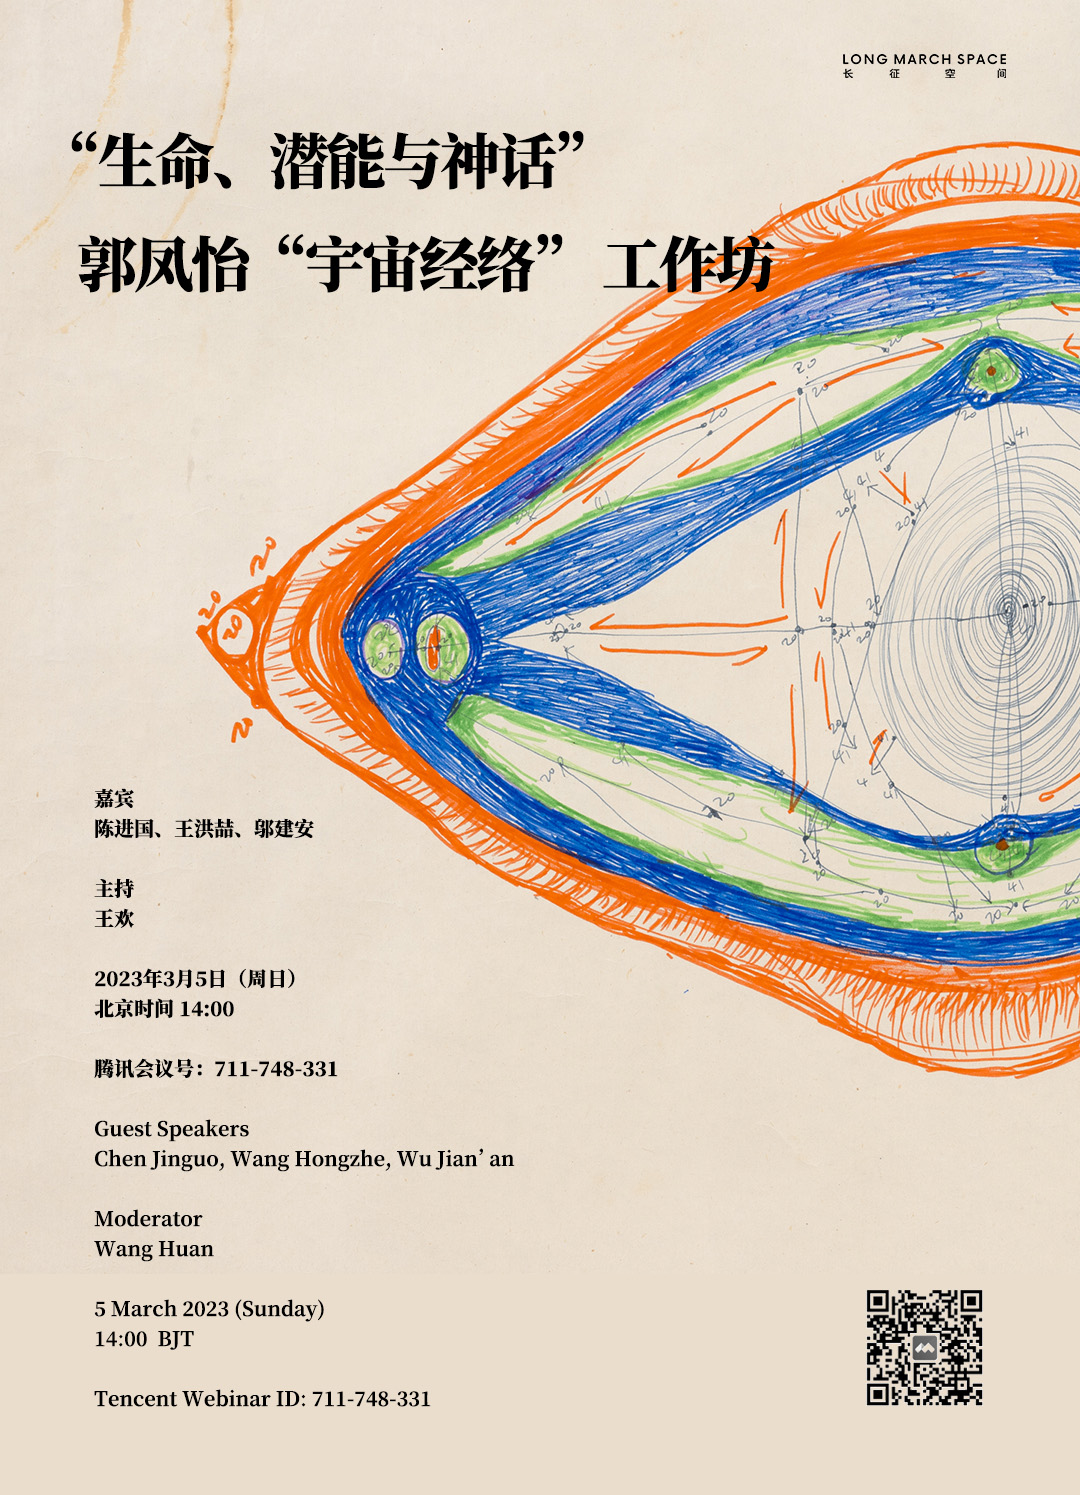 Online workshop "Life, Potential, and Myth" on Guo Fengyi's solo exhibition"Cosmic Meridians"